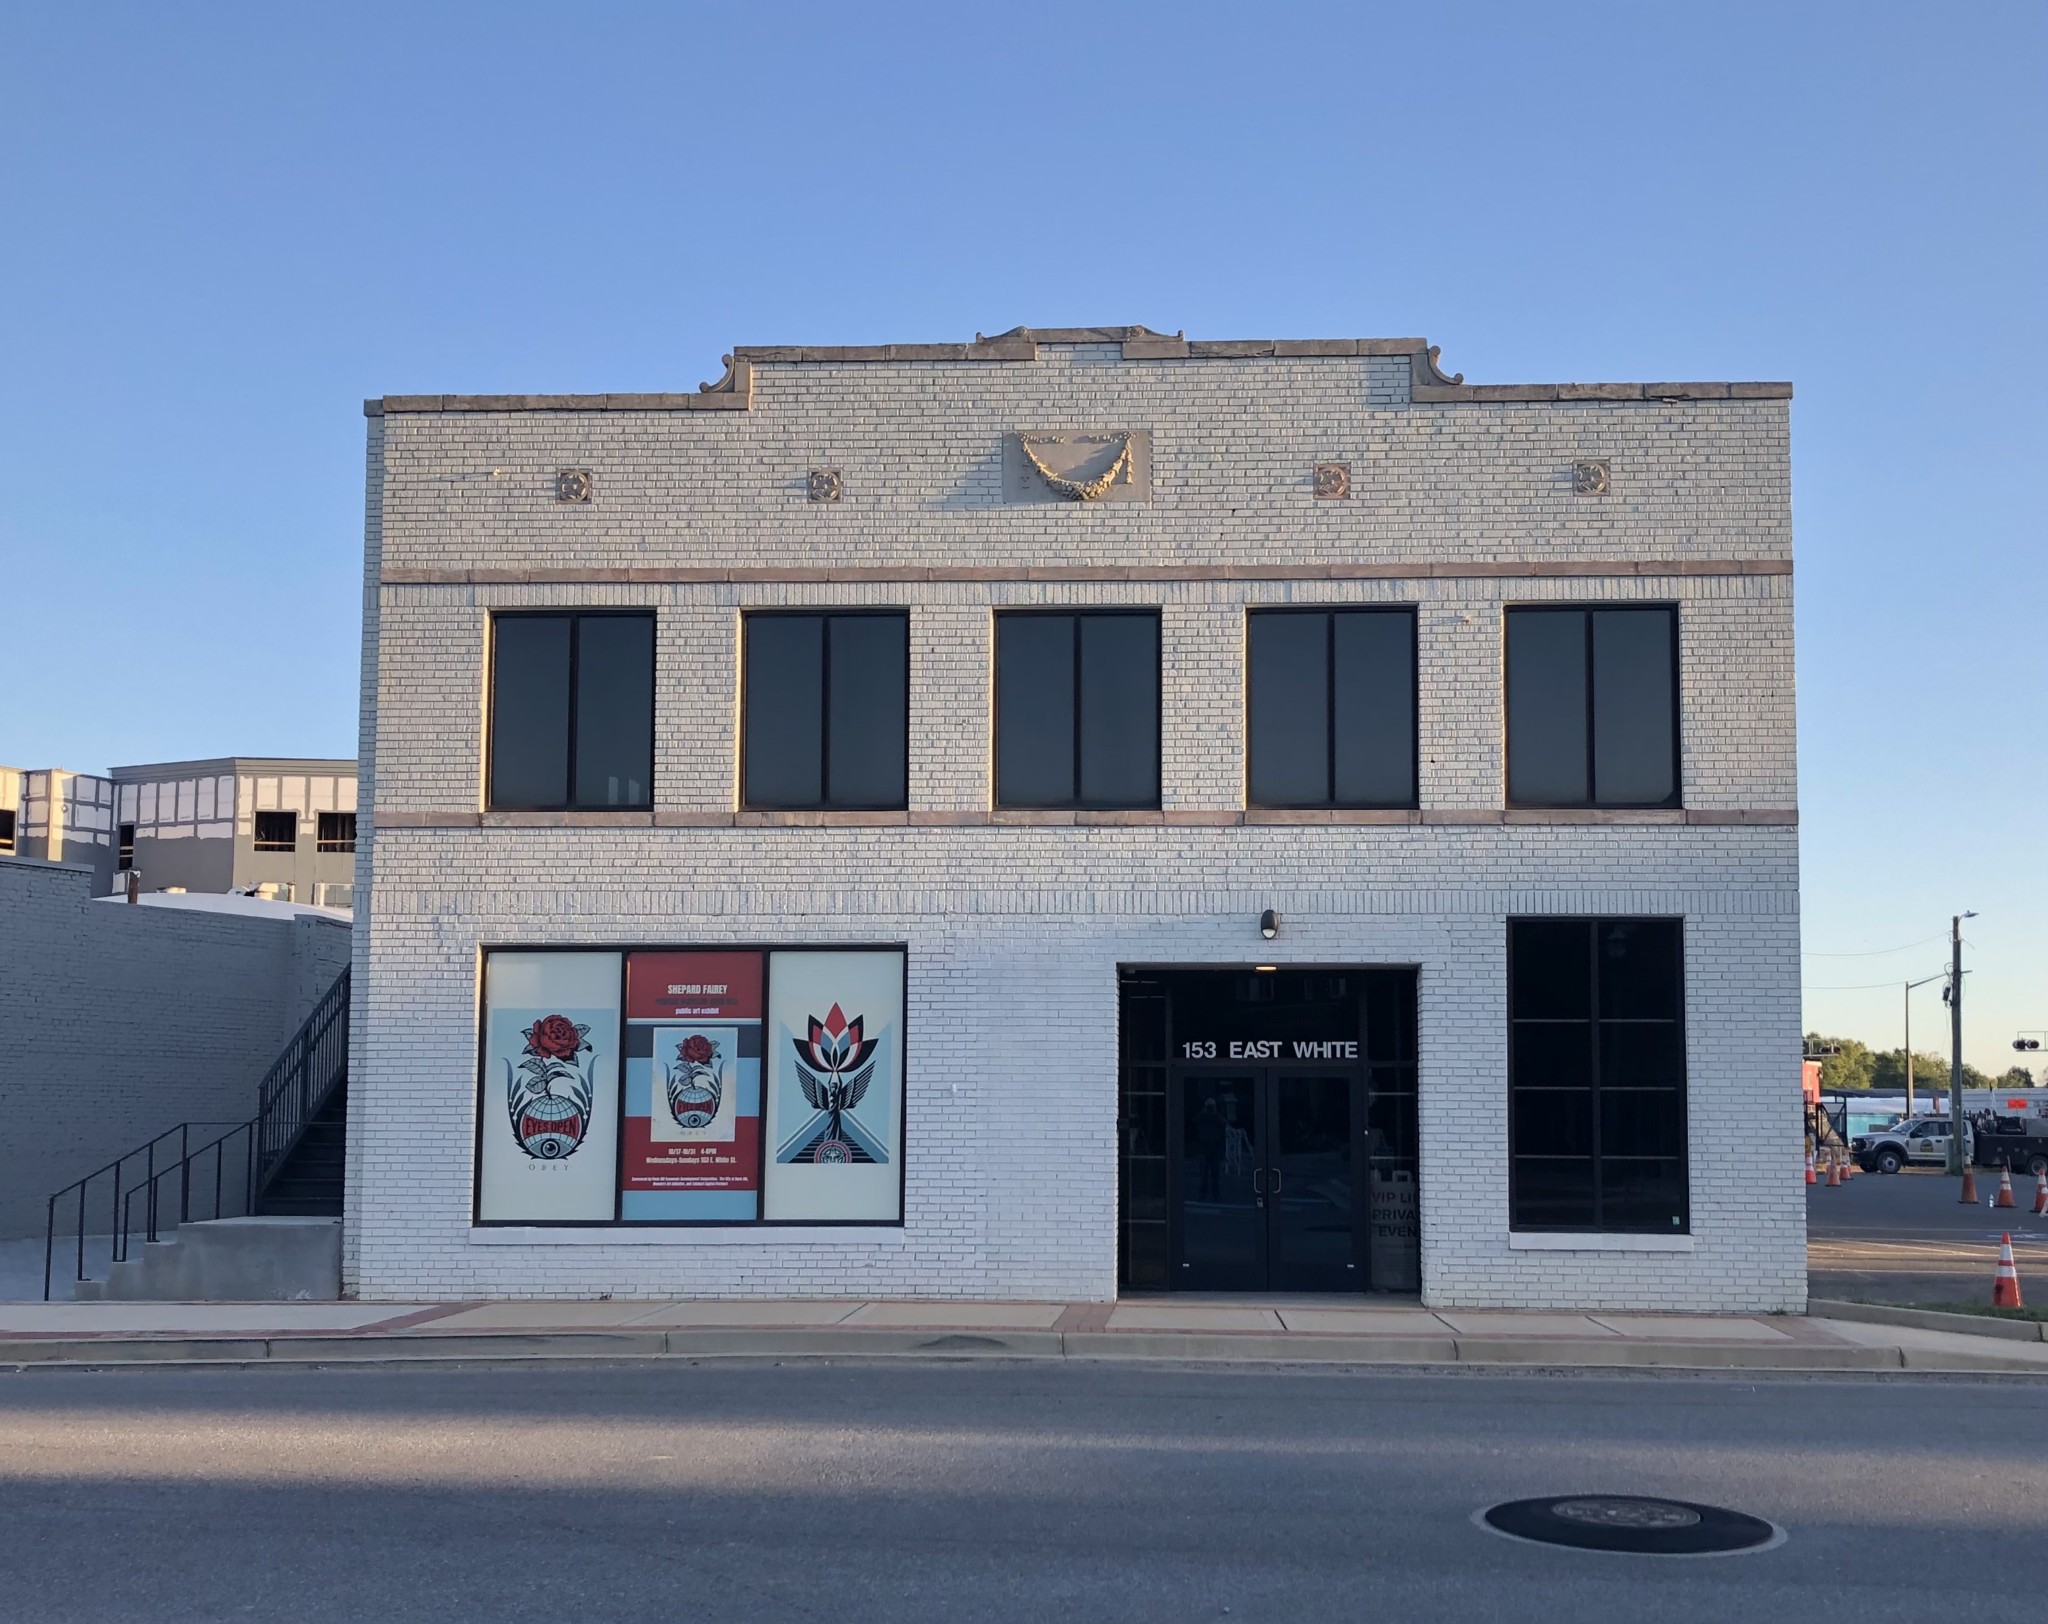 Remodeled building in 2021, in preparation for new business opportunities and the Shepard Fairey Mural - 2021